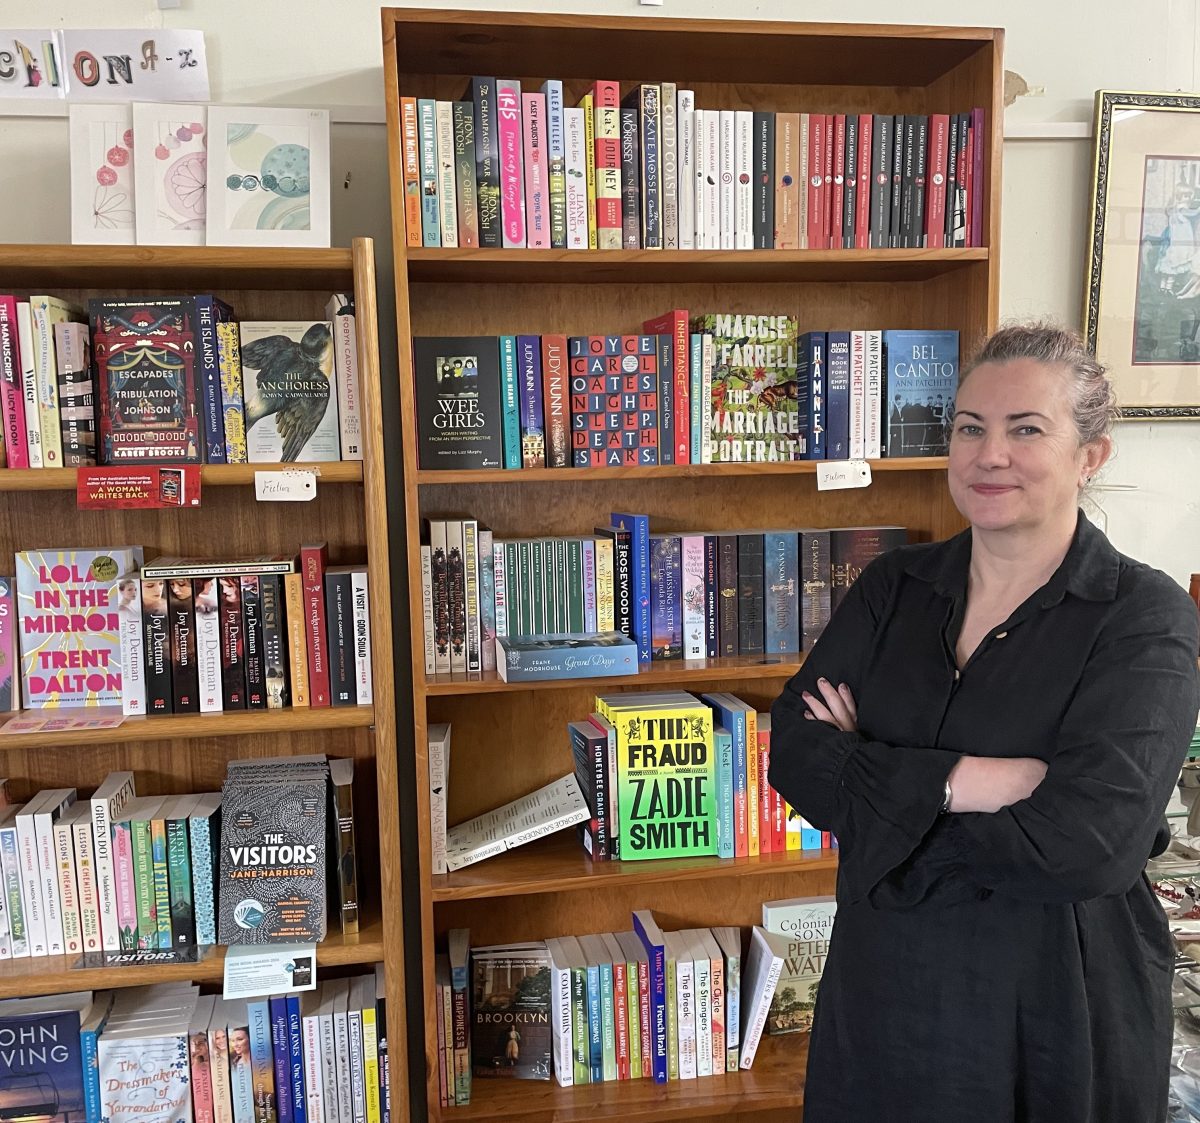 Woman in front of shelves of books